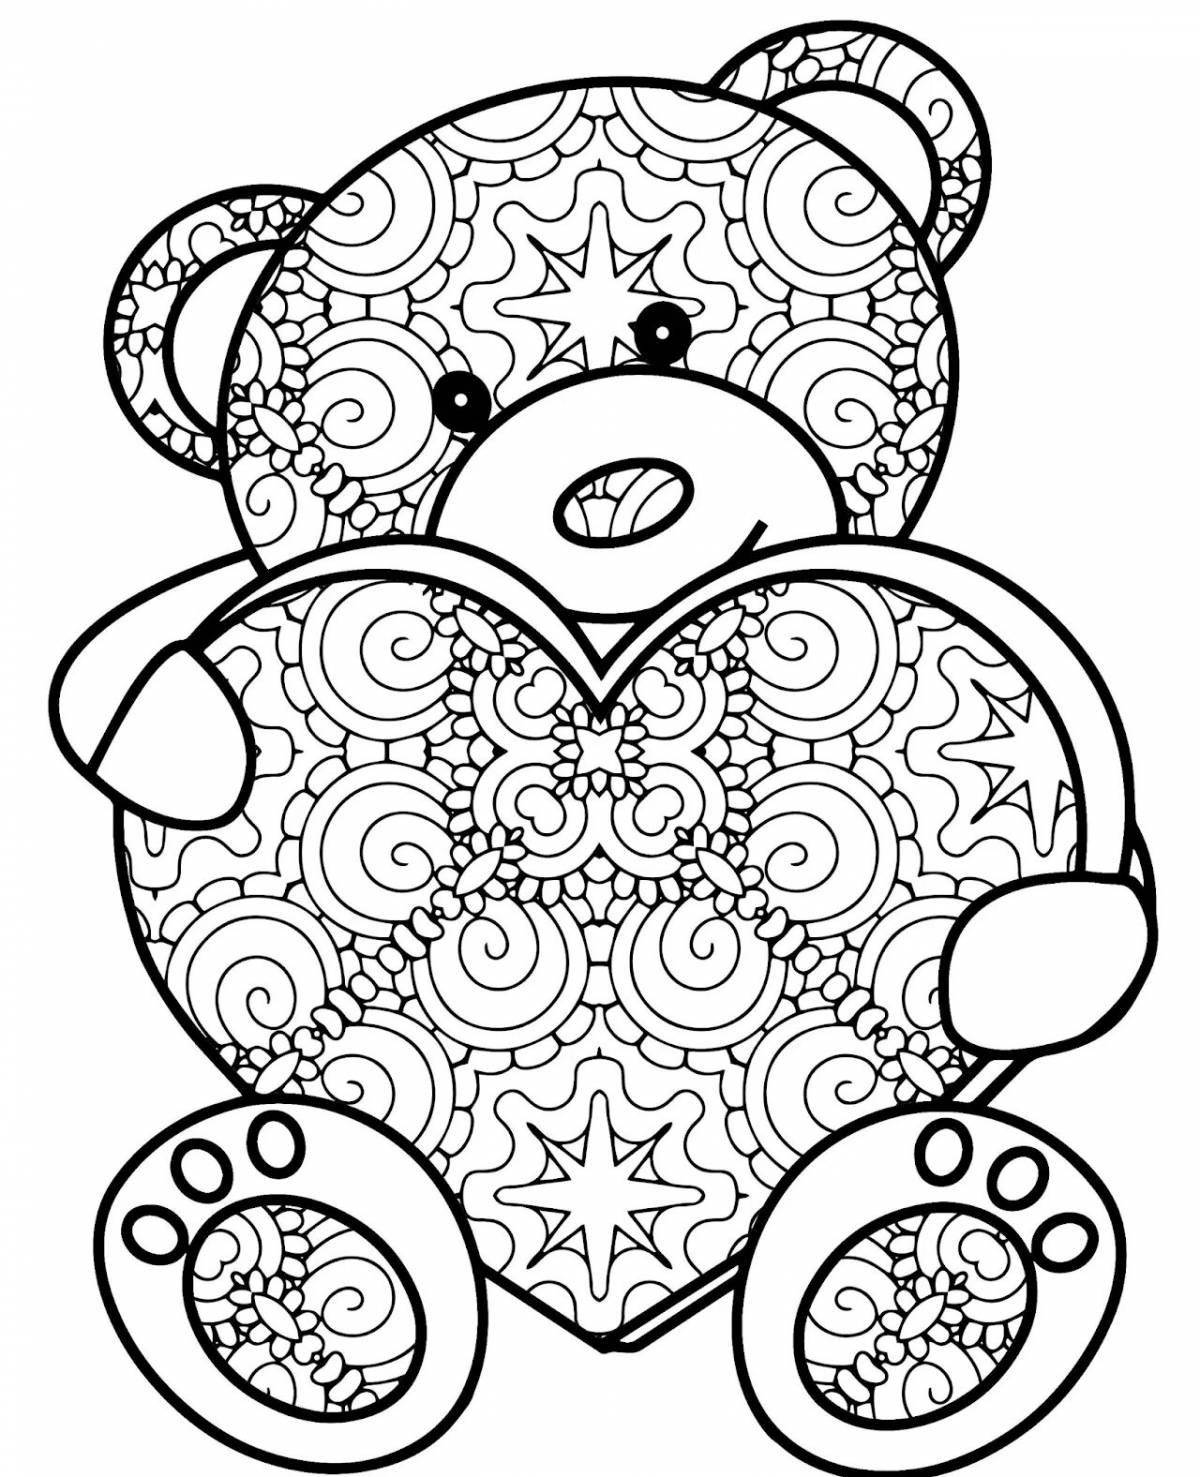 Glowing seal coloring page